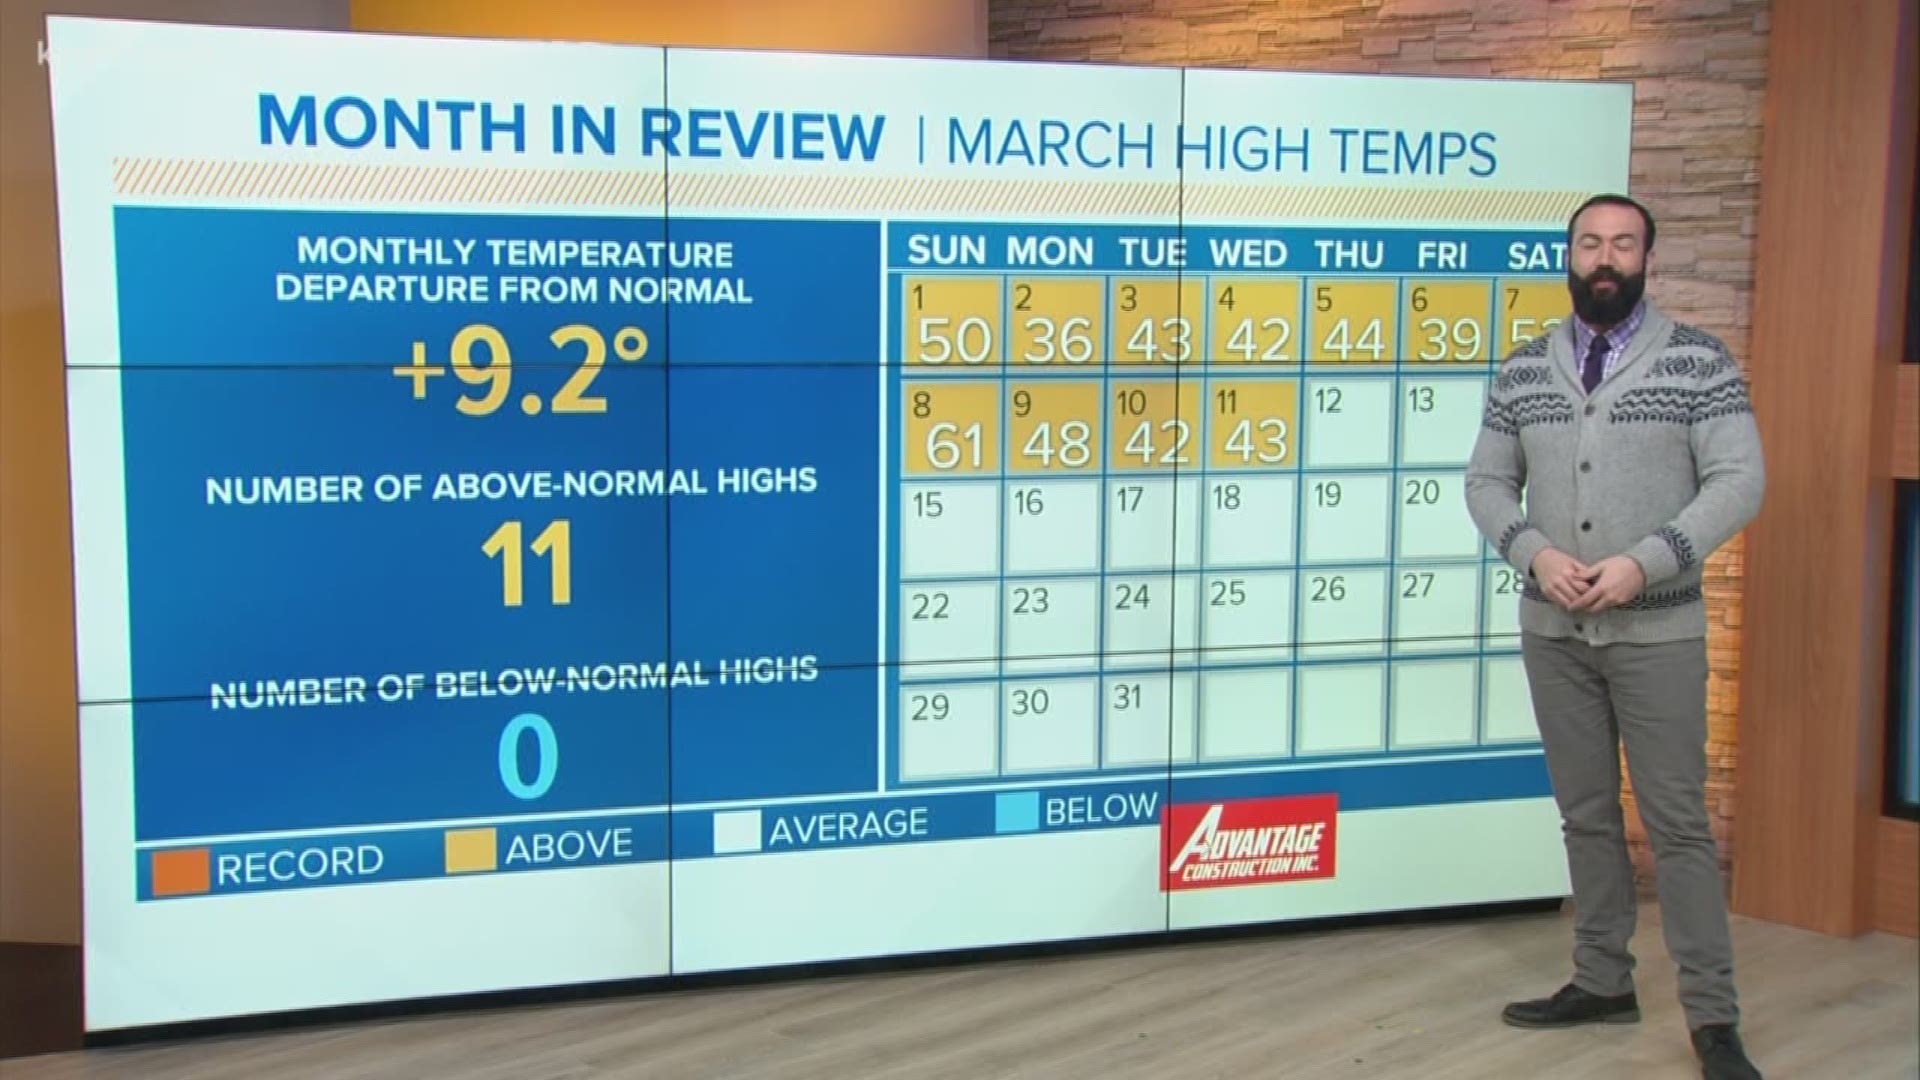 For the month, temps have averaged 9 degrees above average.